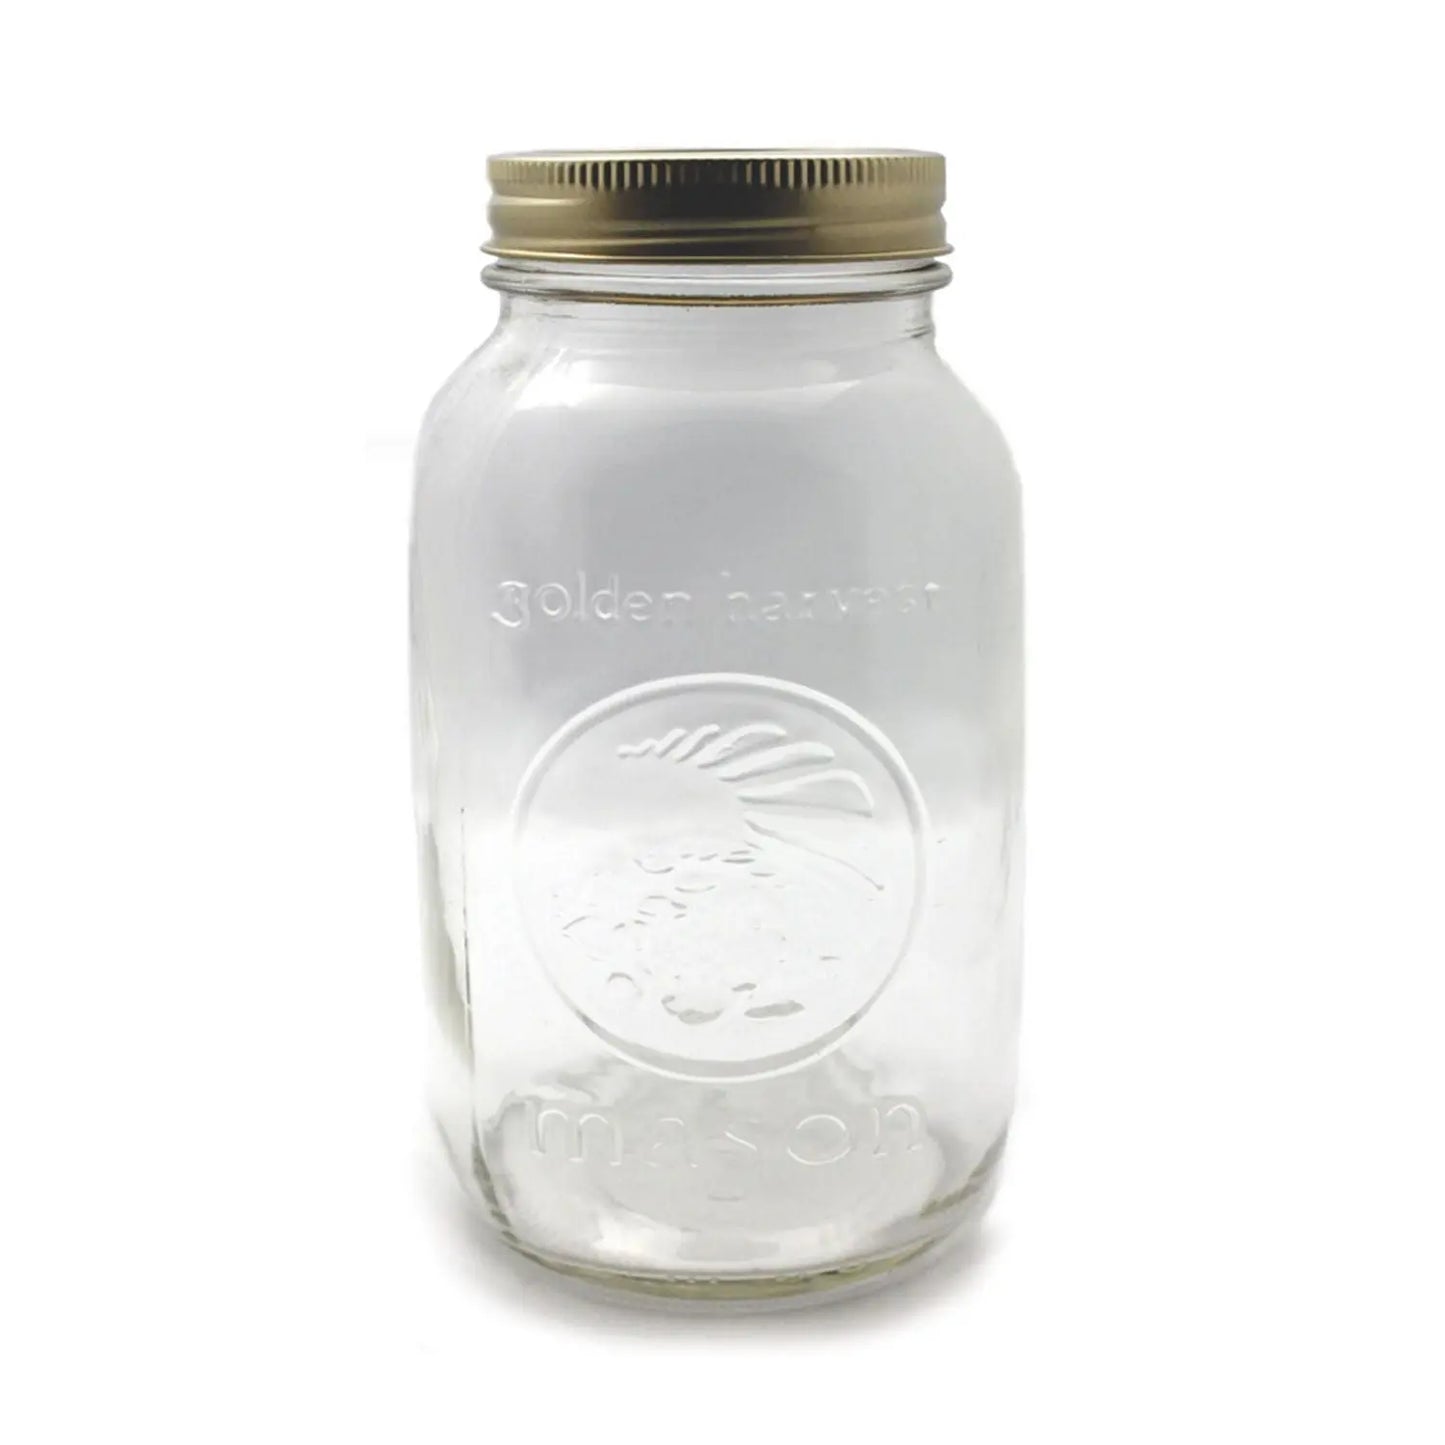 Golden Harvest Regular Mouth 1L Glass Jars with Lids and Bands, 12 Count MK Smith's Shop